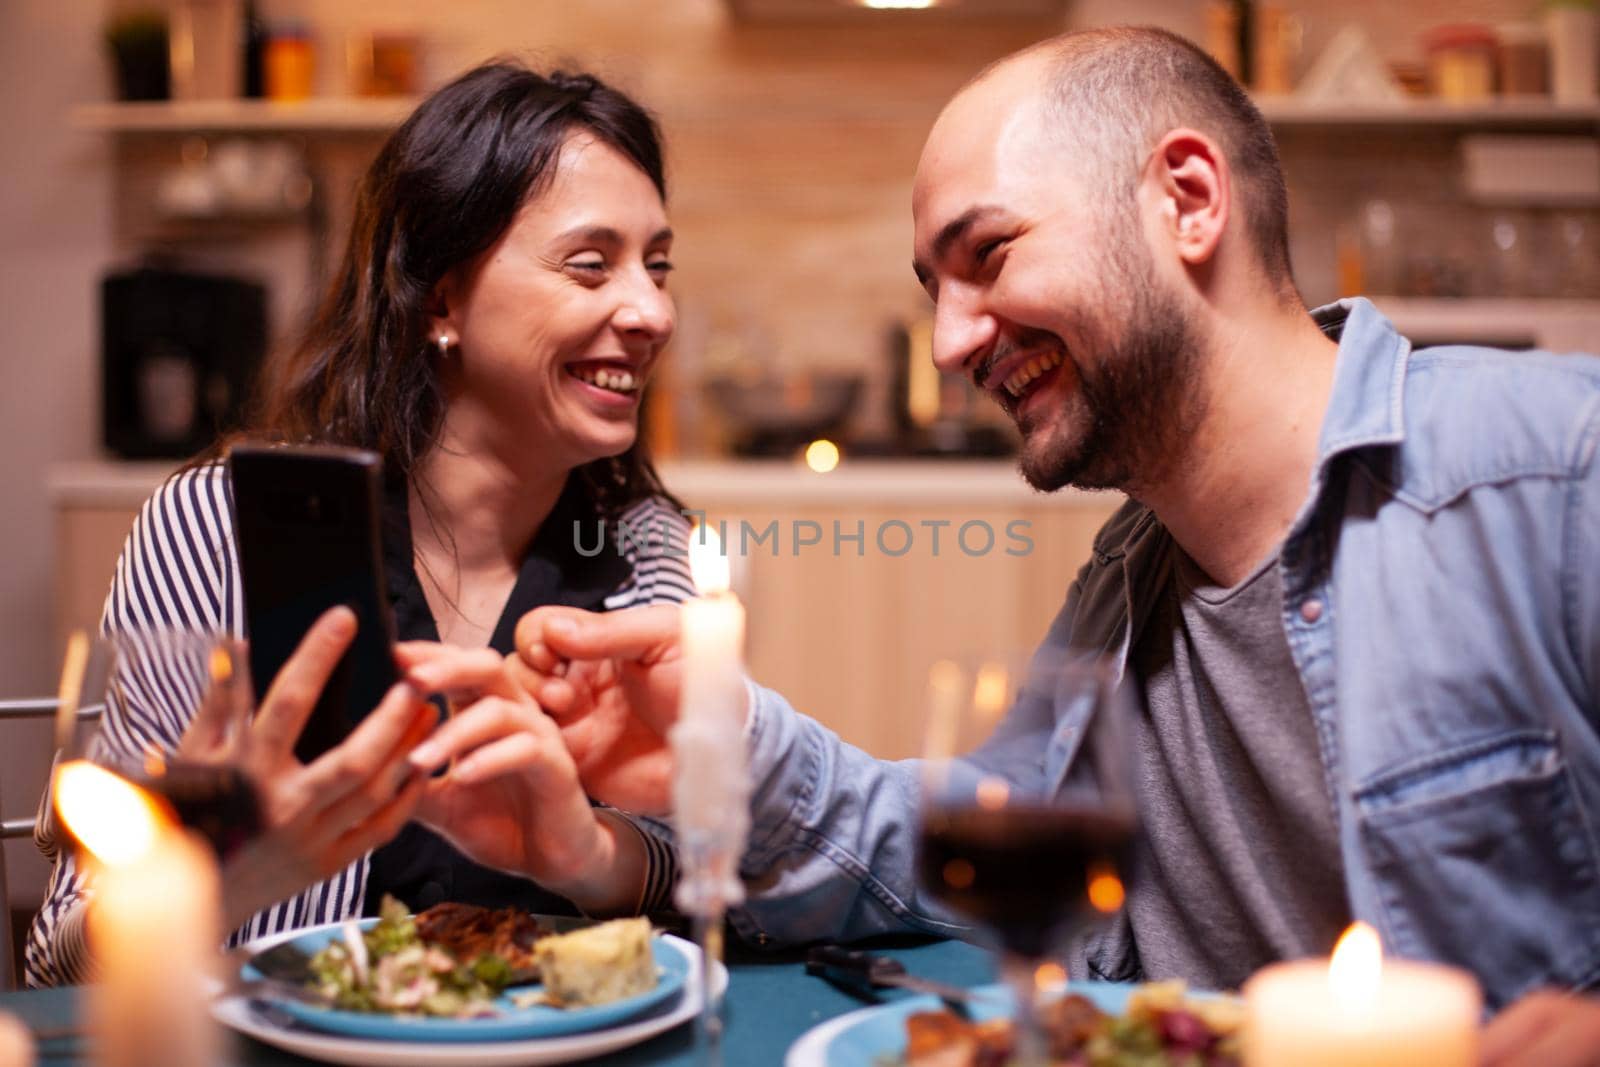 Cheerful couple laughing using smartphone during relationship anniversary. Adults sitting at the table in the kitchen browsing, searching, using smartphones, internet, celebrating .